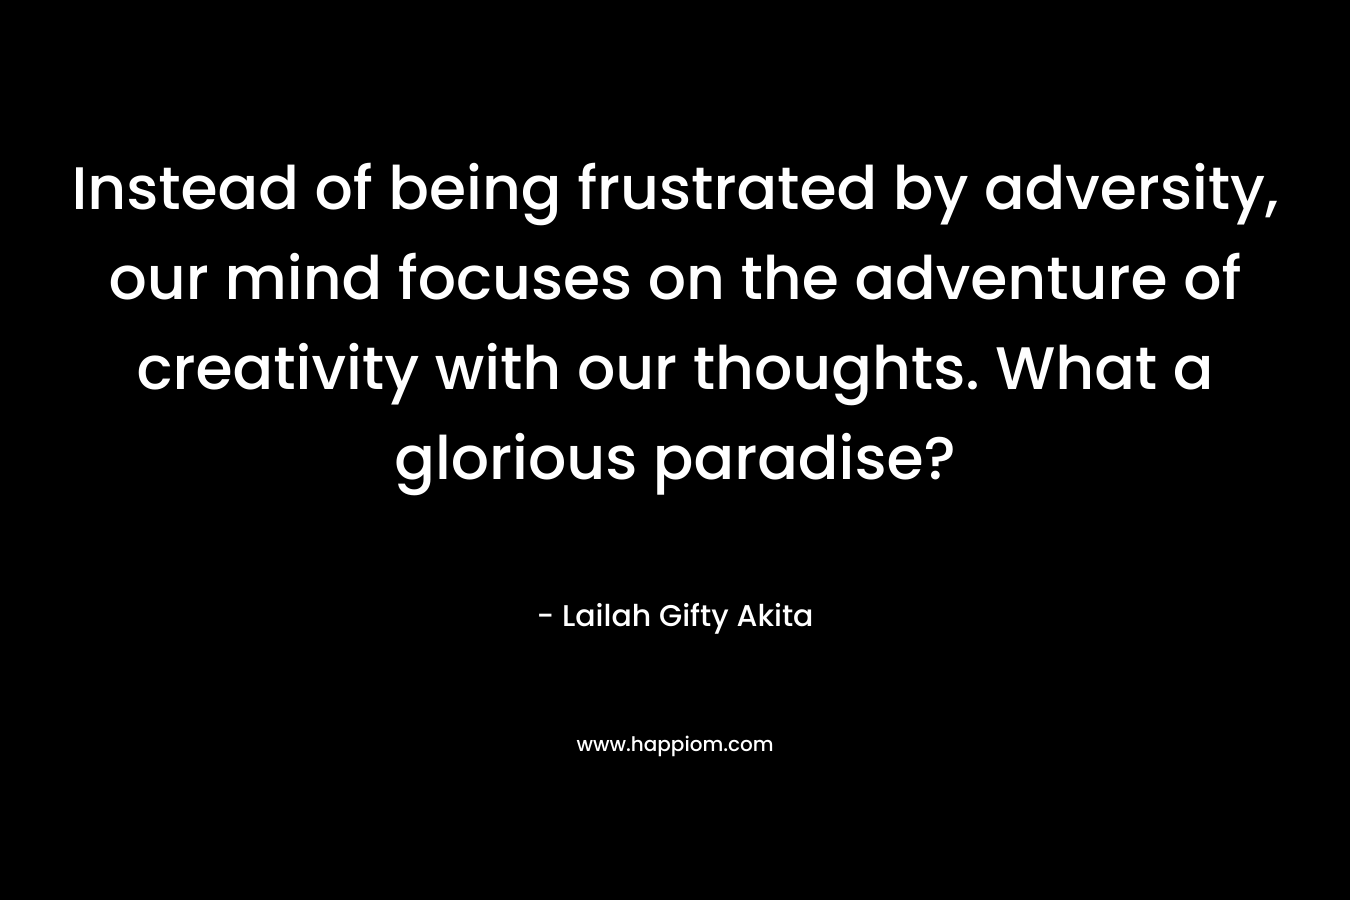 Instead of being frustrated by adversity, our mind focuses on the adventure of creativity with our thoughts. What a glorious paradise? – Lailah Gifty Akita